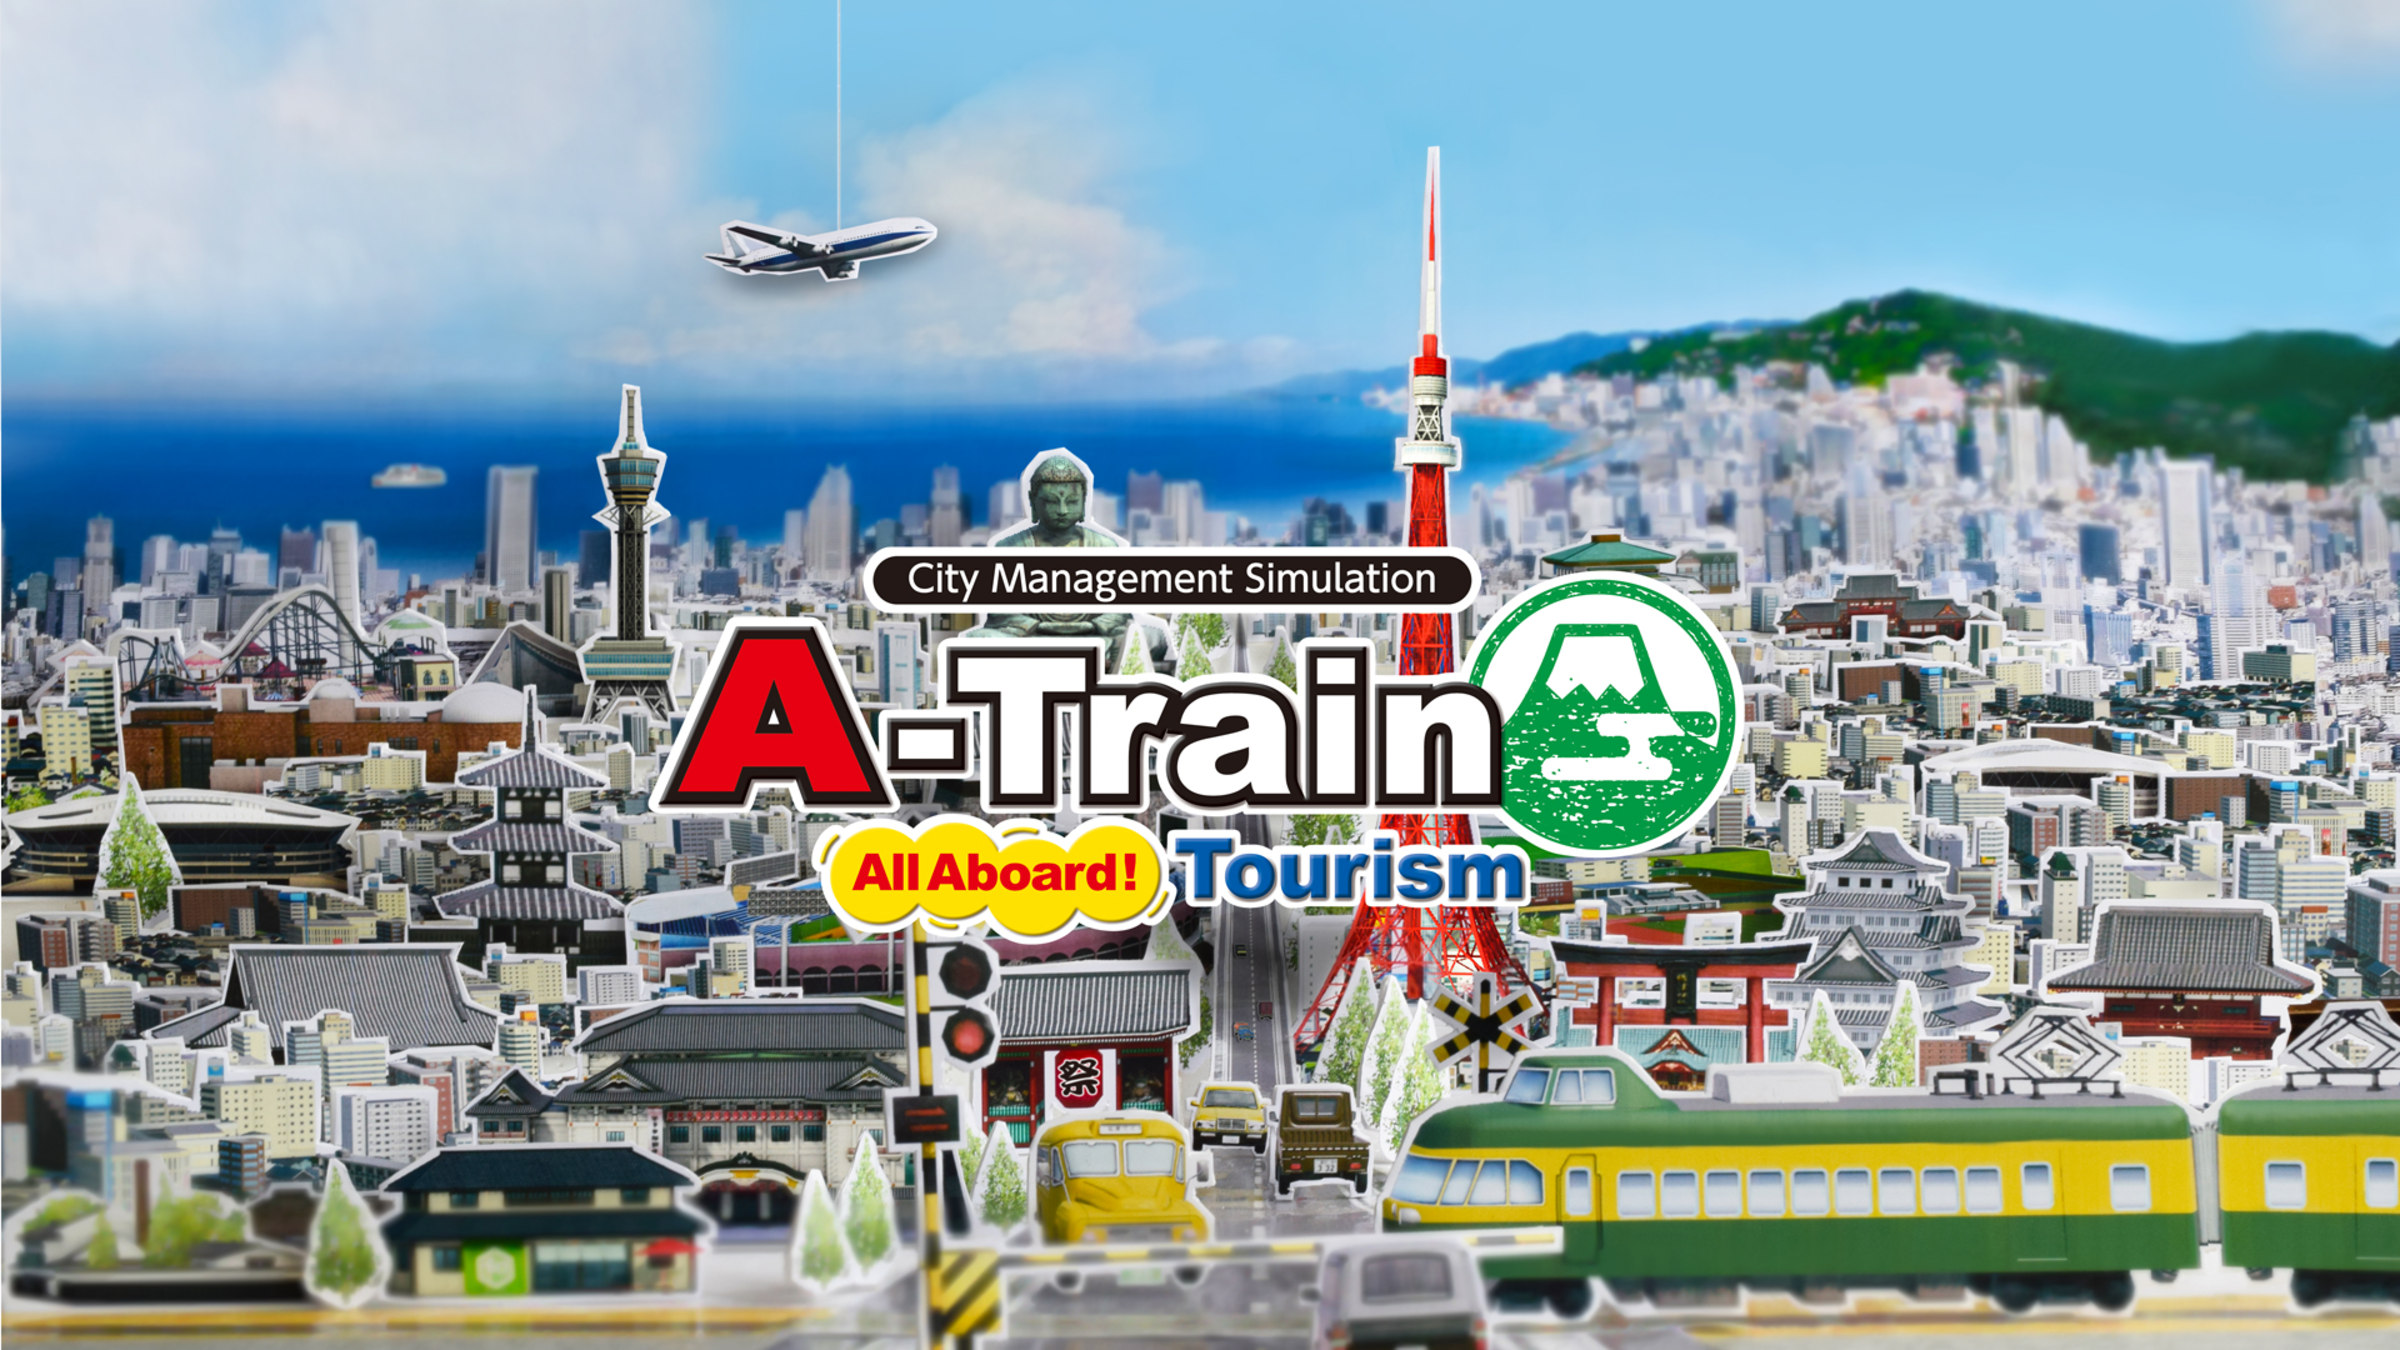 Nintendo All Nintendo Site Switch A-Train: - Tourism Official for Aboard!